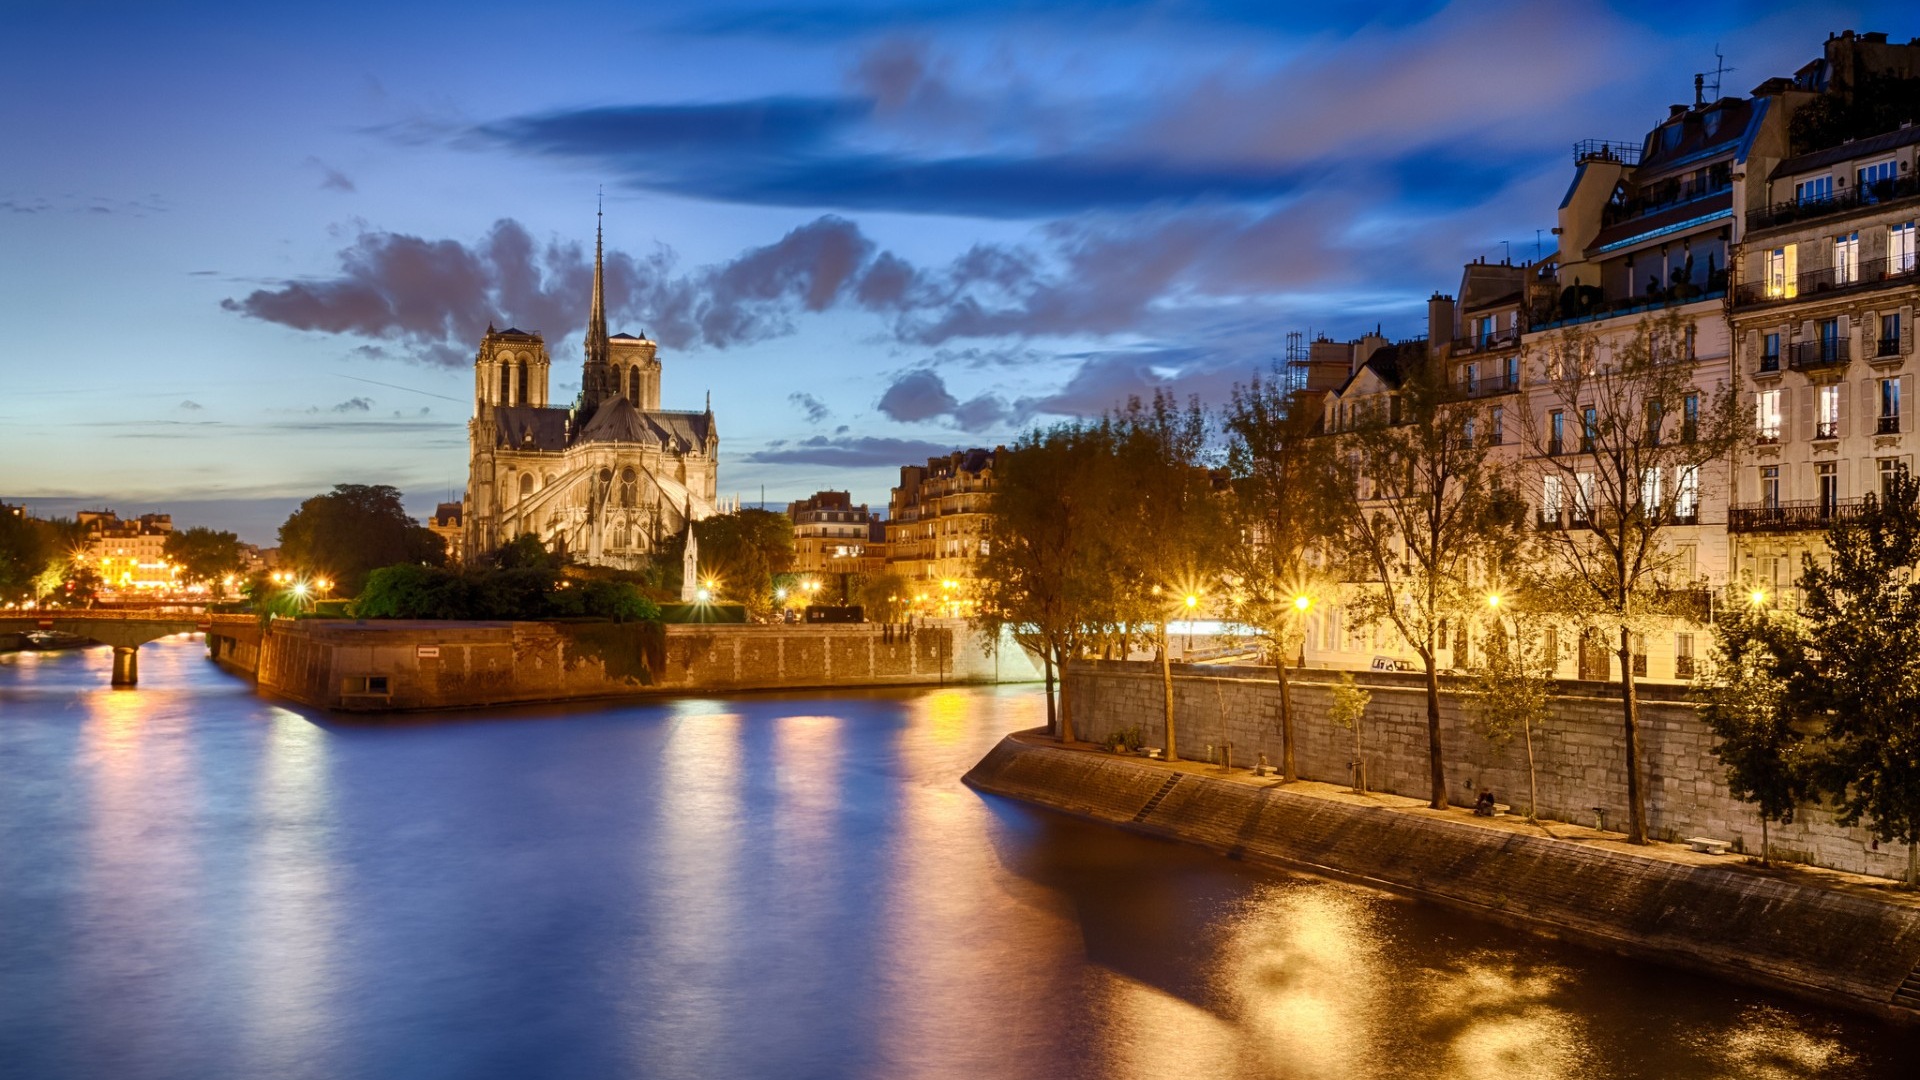 Notre Dame HD Wallpapers #1 - 1920x1080